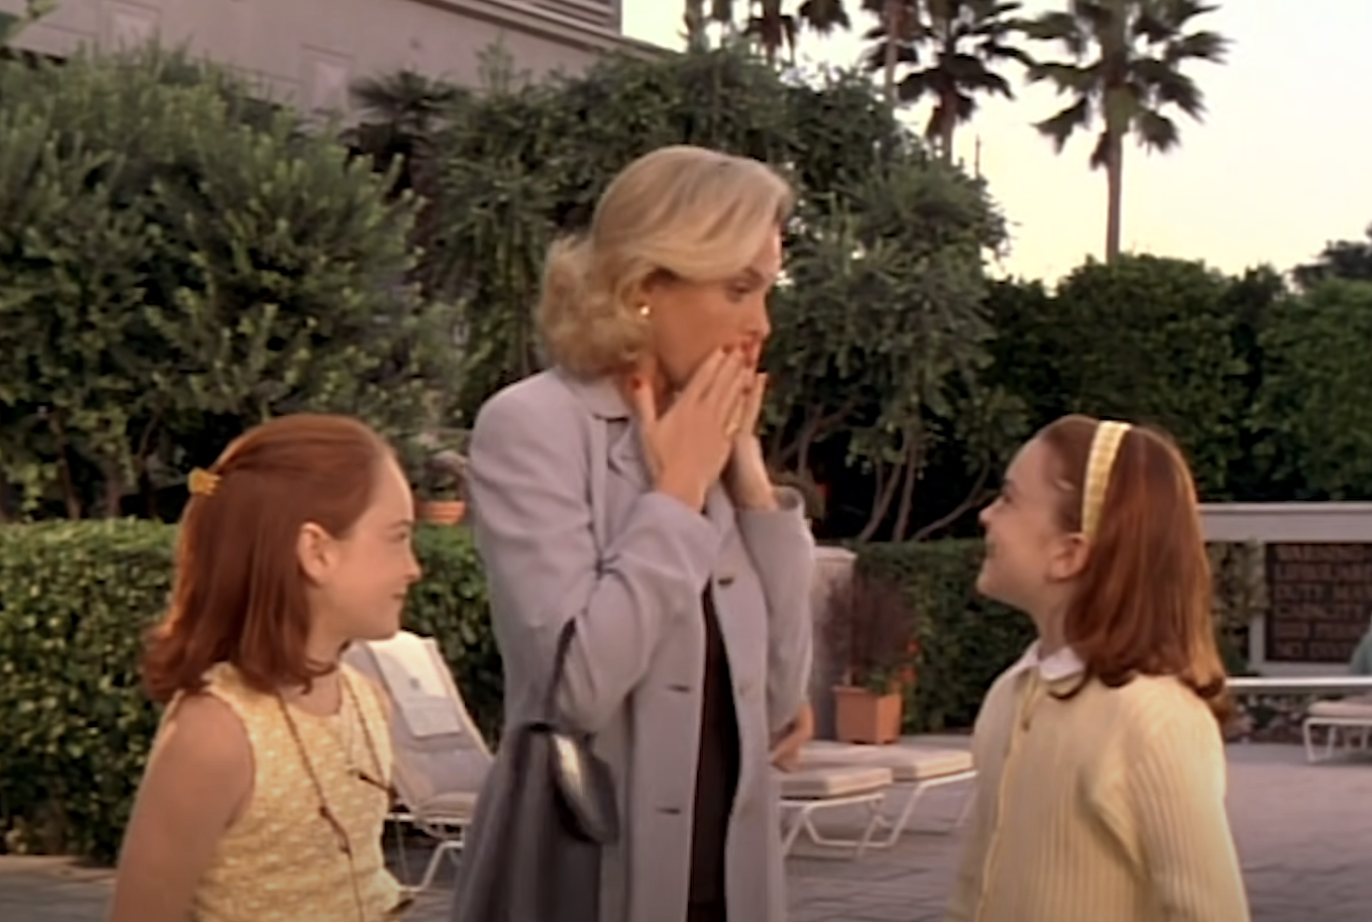 Annie and Hallie watch their mother, dressed in a suit, react with surprise, in &#x27;The Parent Trap&#x27;